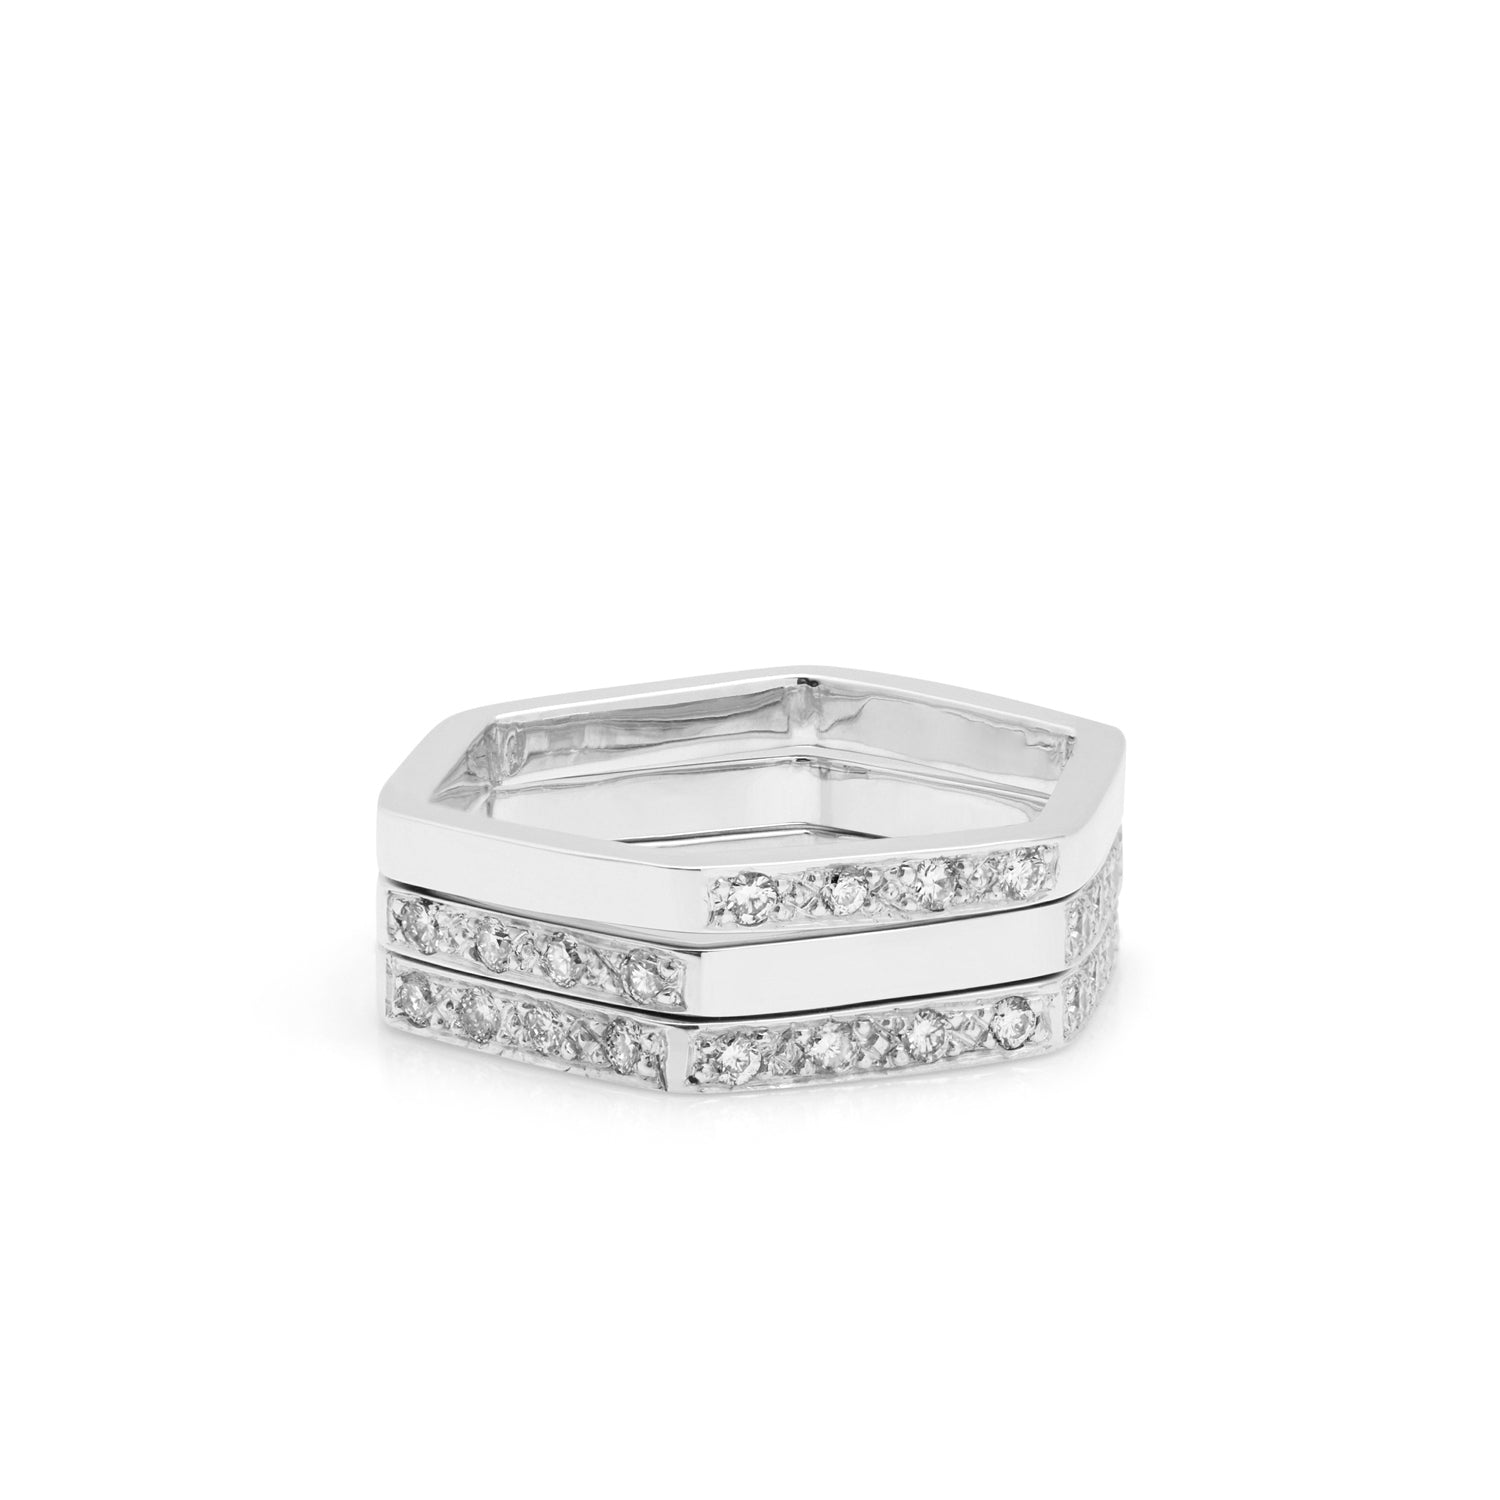 Hexagon Stack of 3 Rings with Diamonds - 9k White Gold